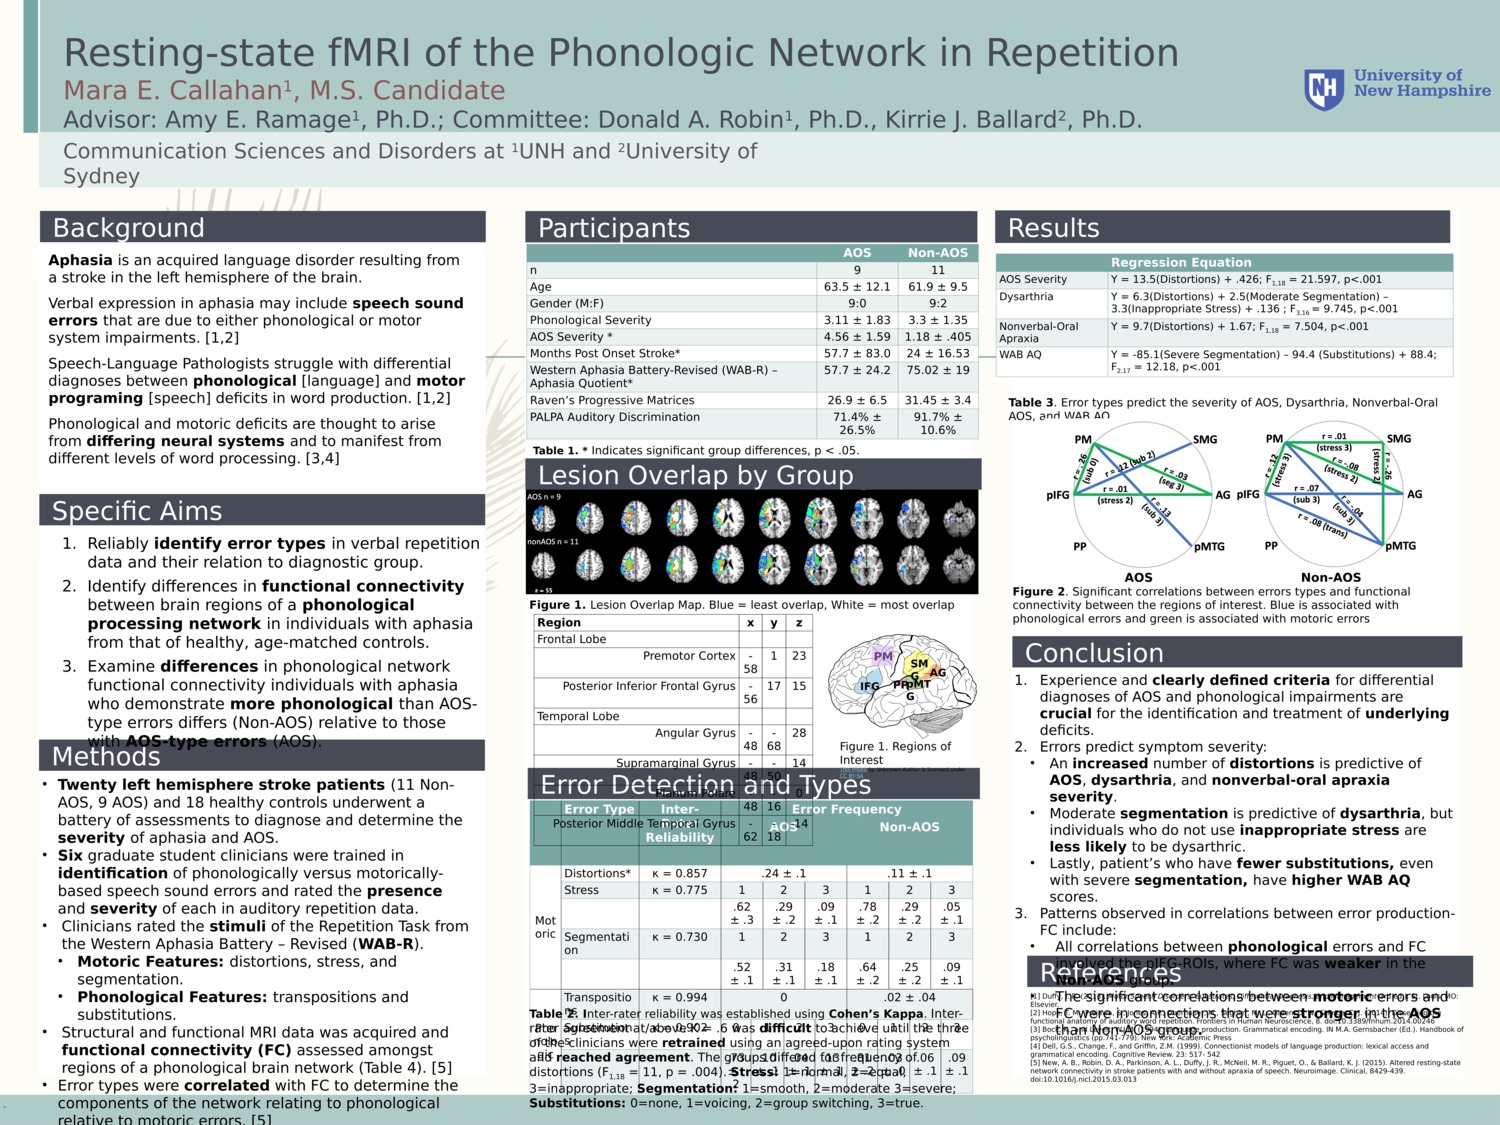 Resting-State Fmri Of The Phonologic Network In Repetition by mec1093